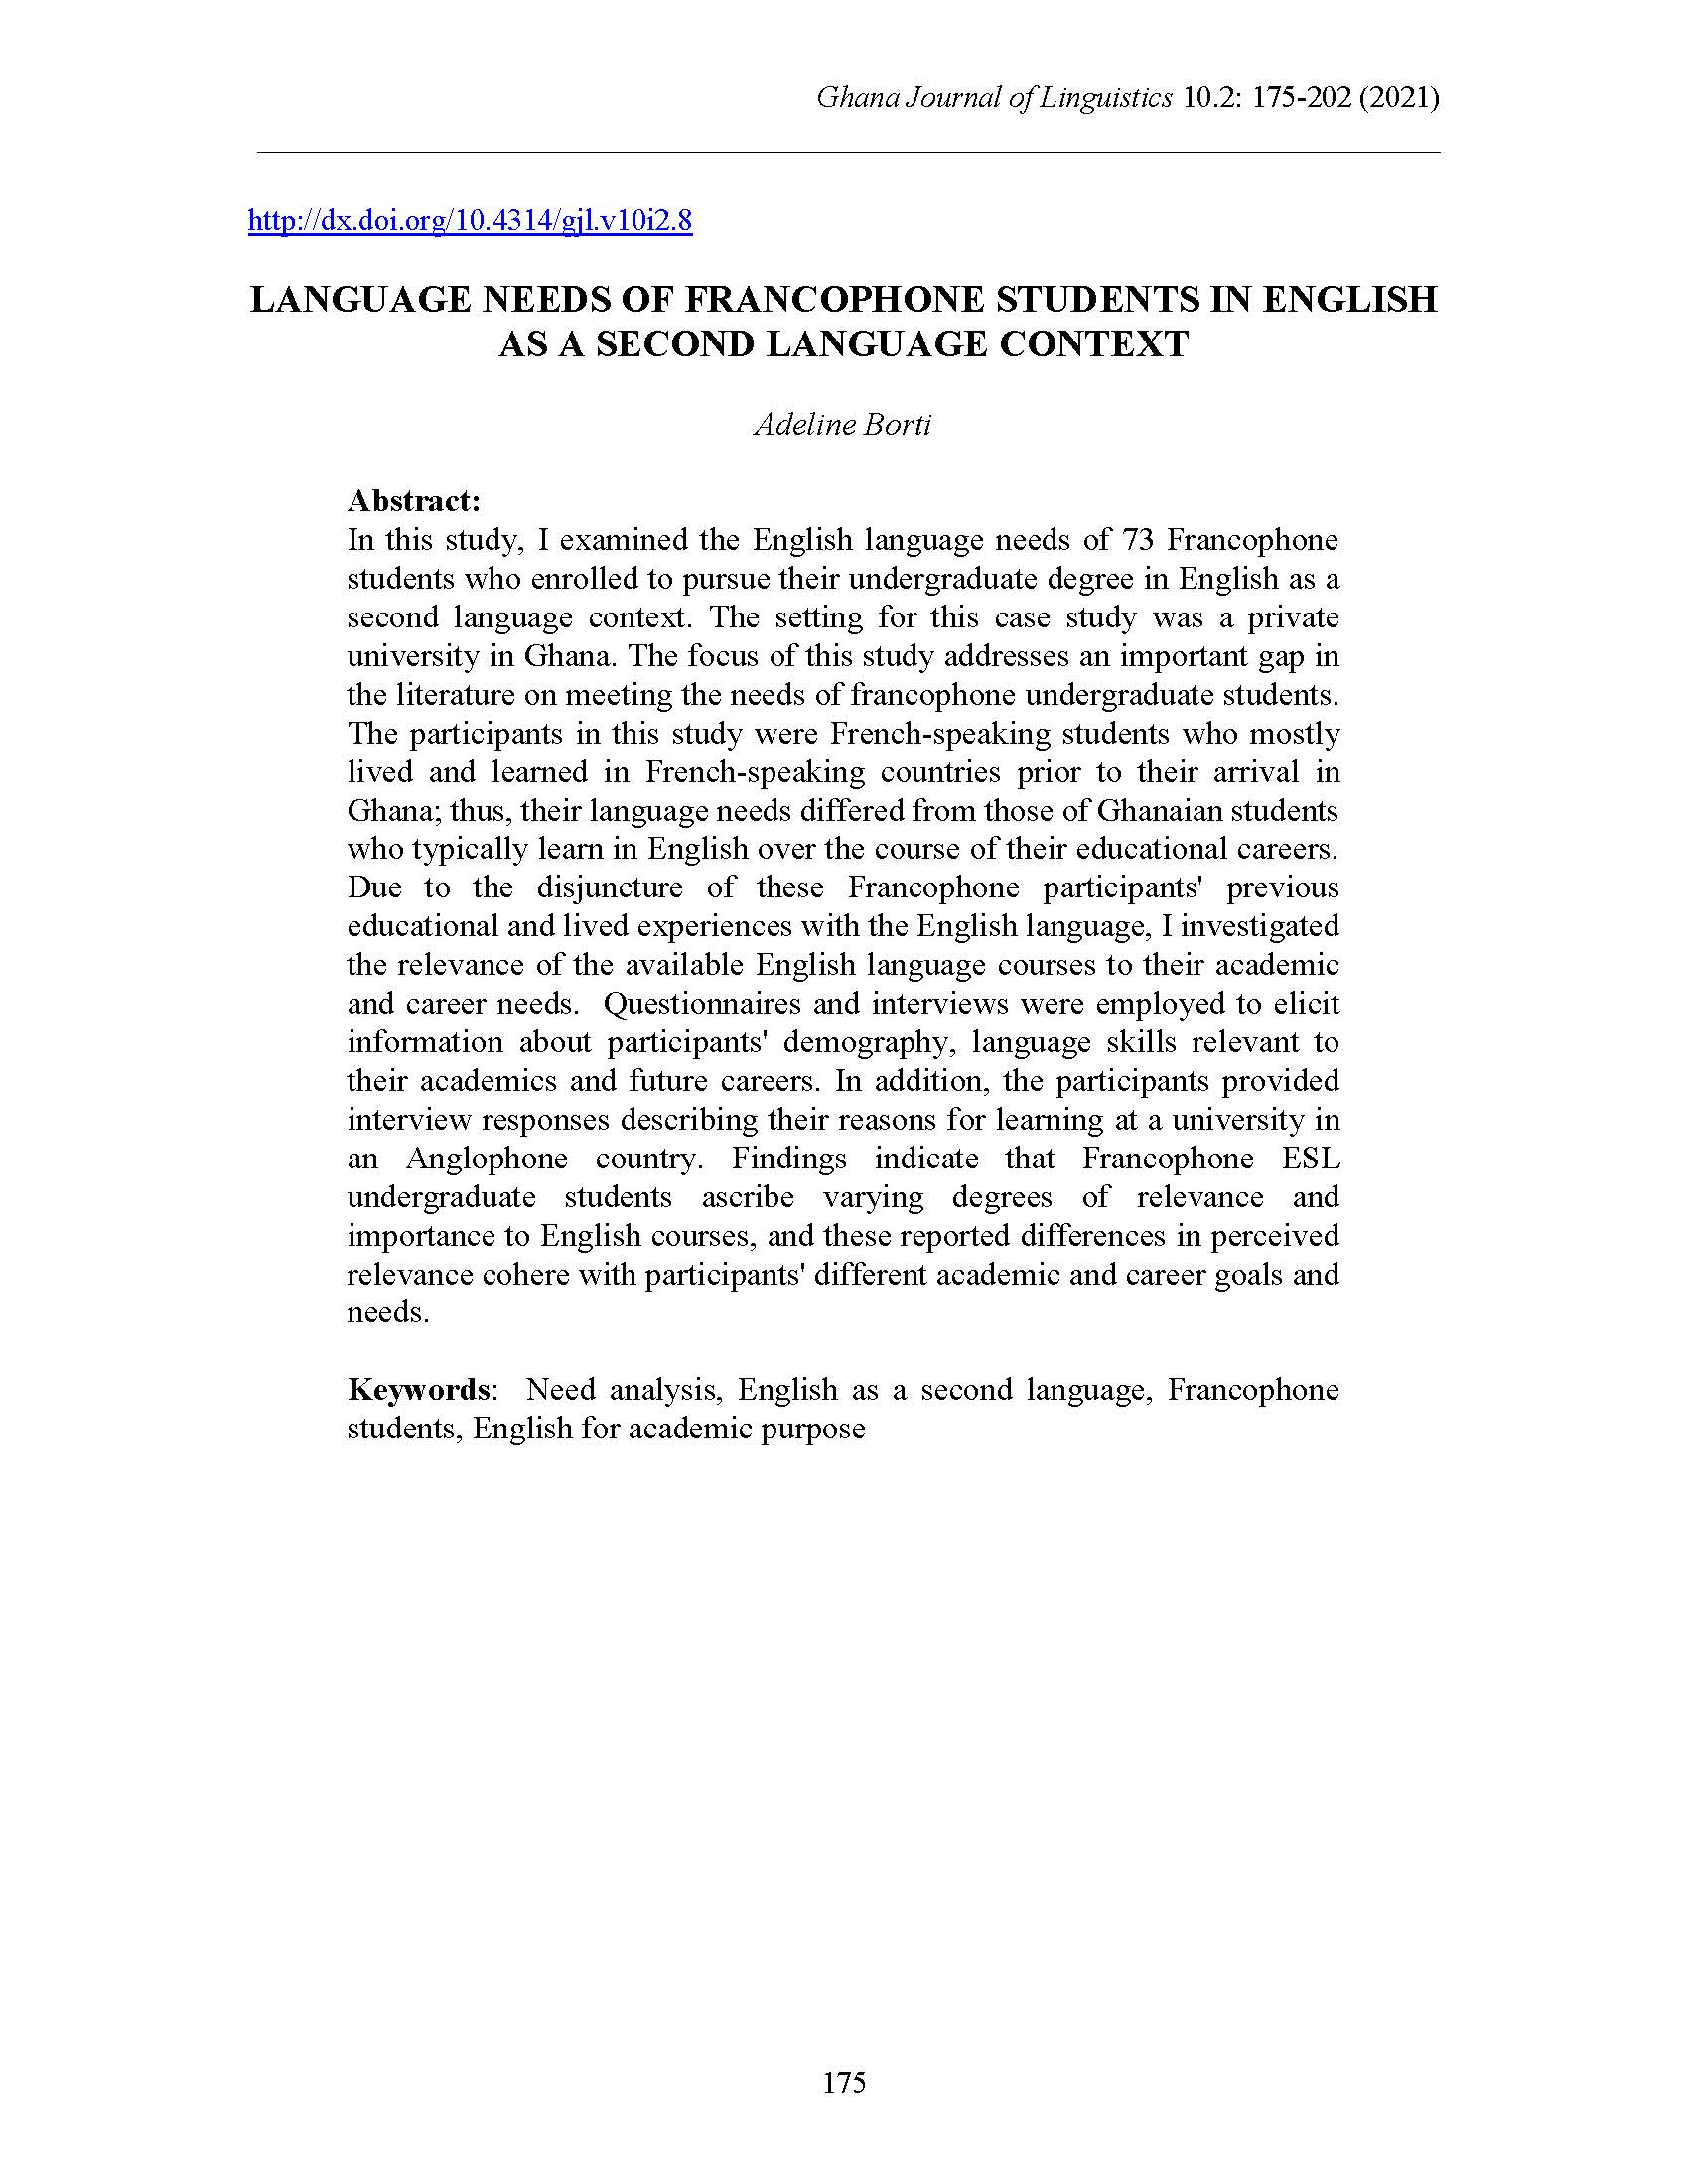 Language Needs of Francophone Students in English as a Second Language Context